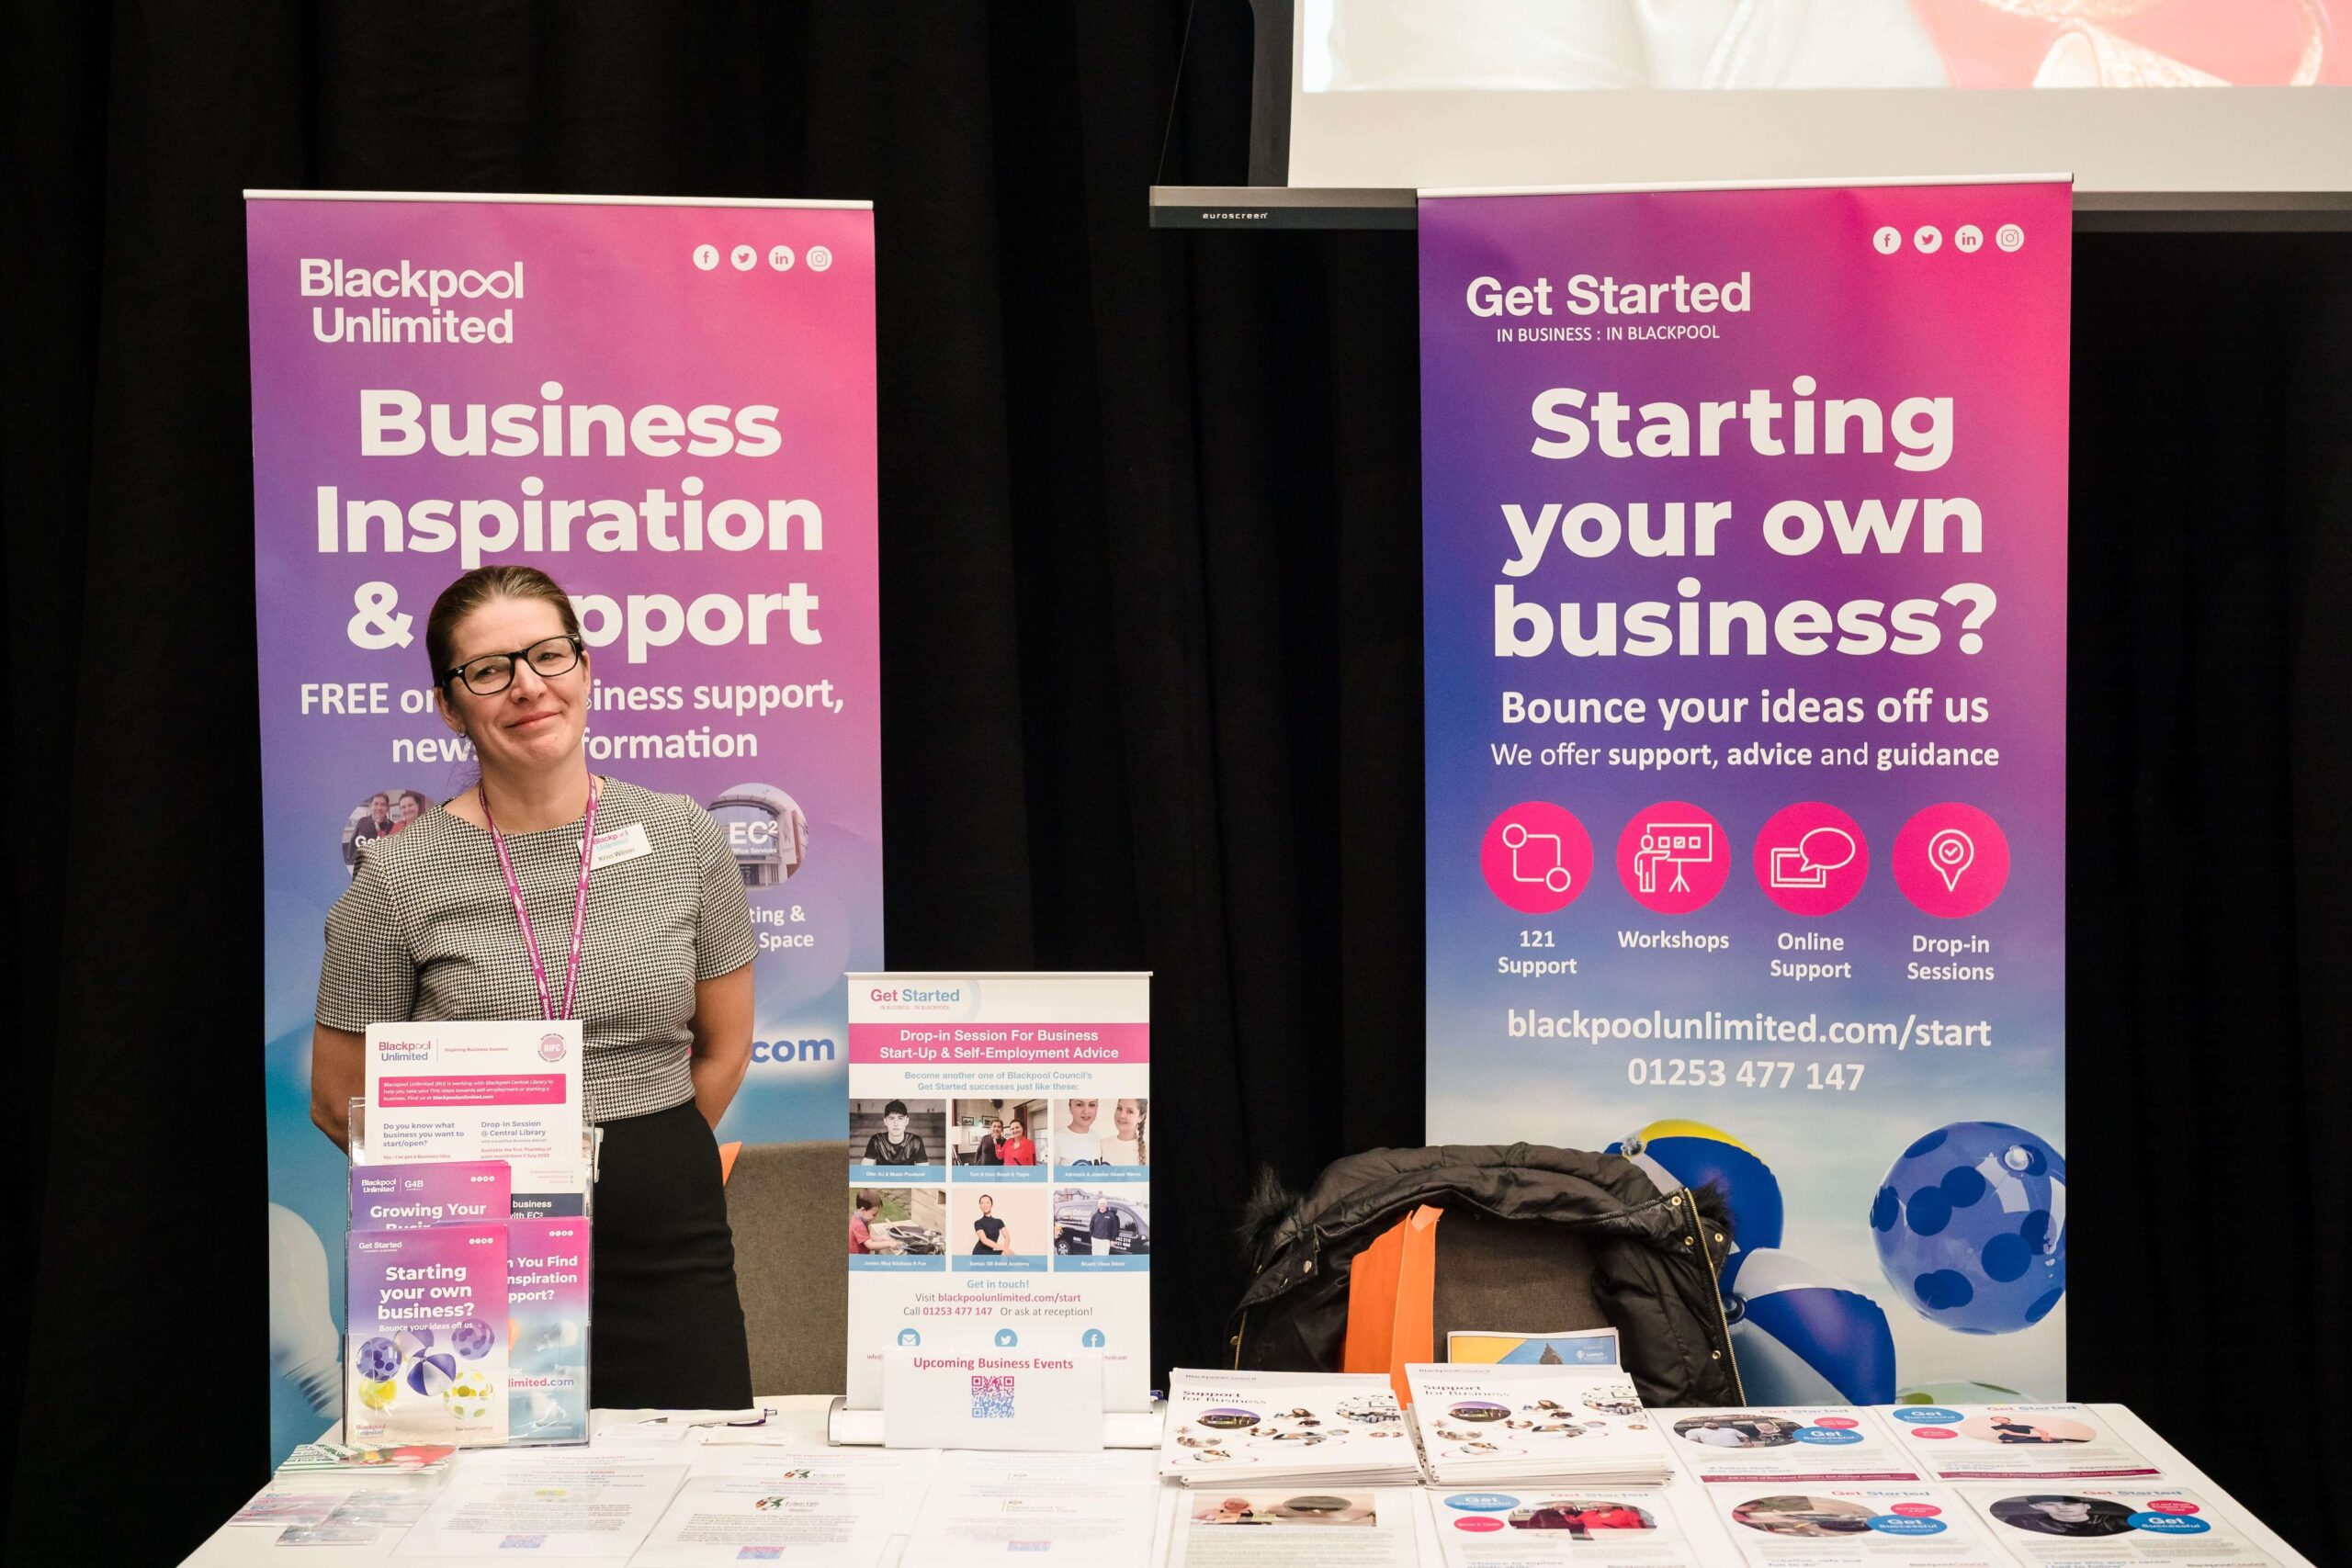 Image shows a colleague from Blackpool Unlimited exhibiting at Blackpool Business Expo.